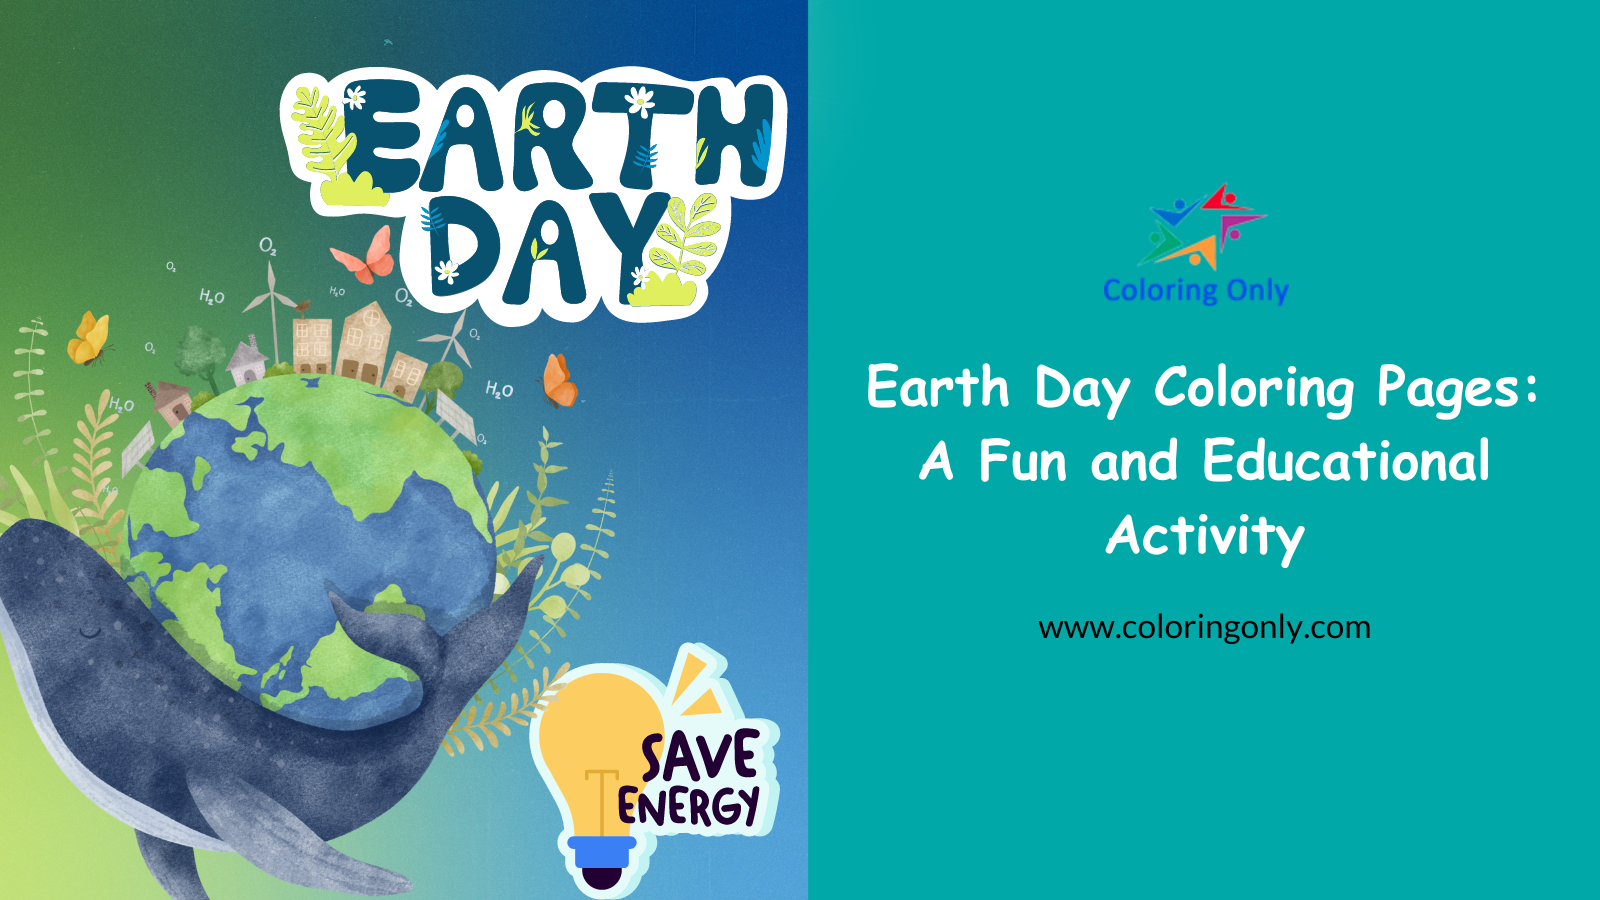 Earth Day Coloring Pages: A Fun and Educational Activity